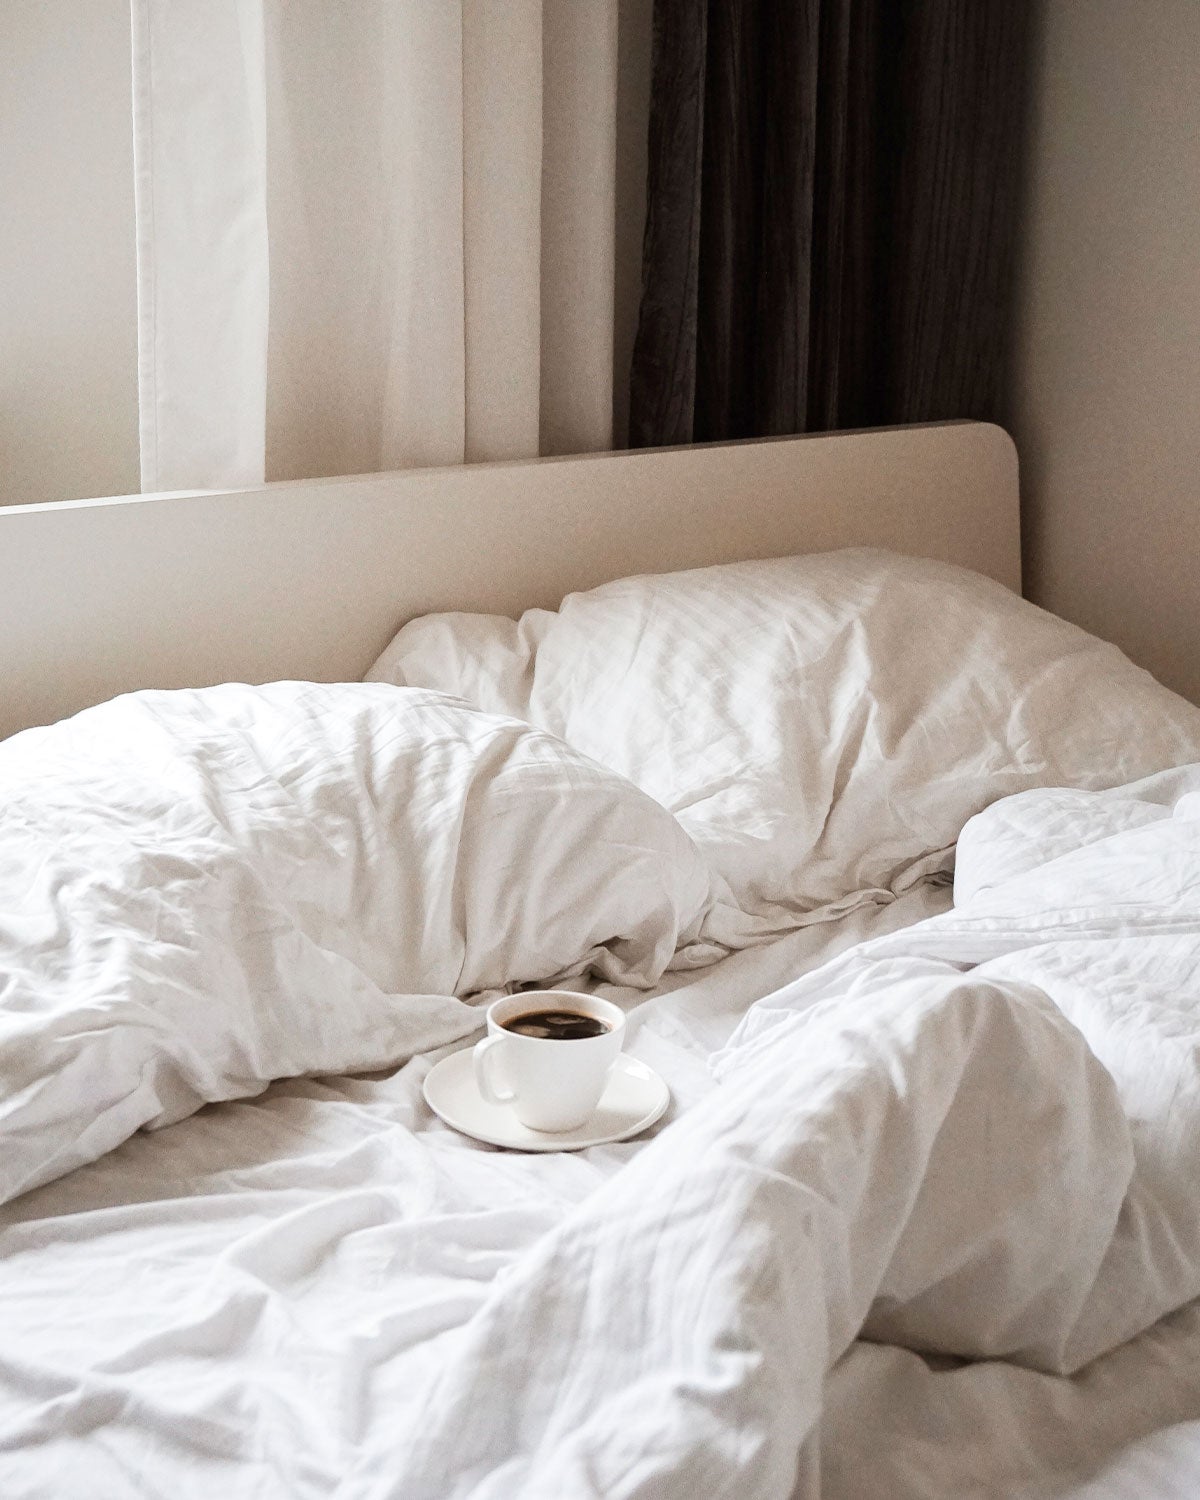 Cup of coffee in an empty unmade bed